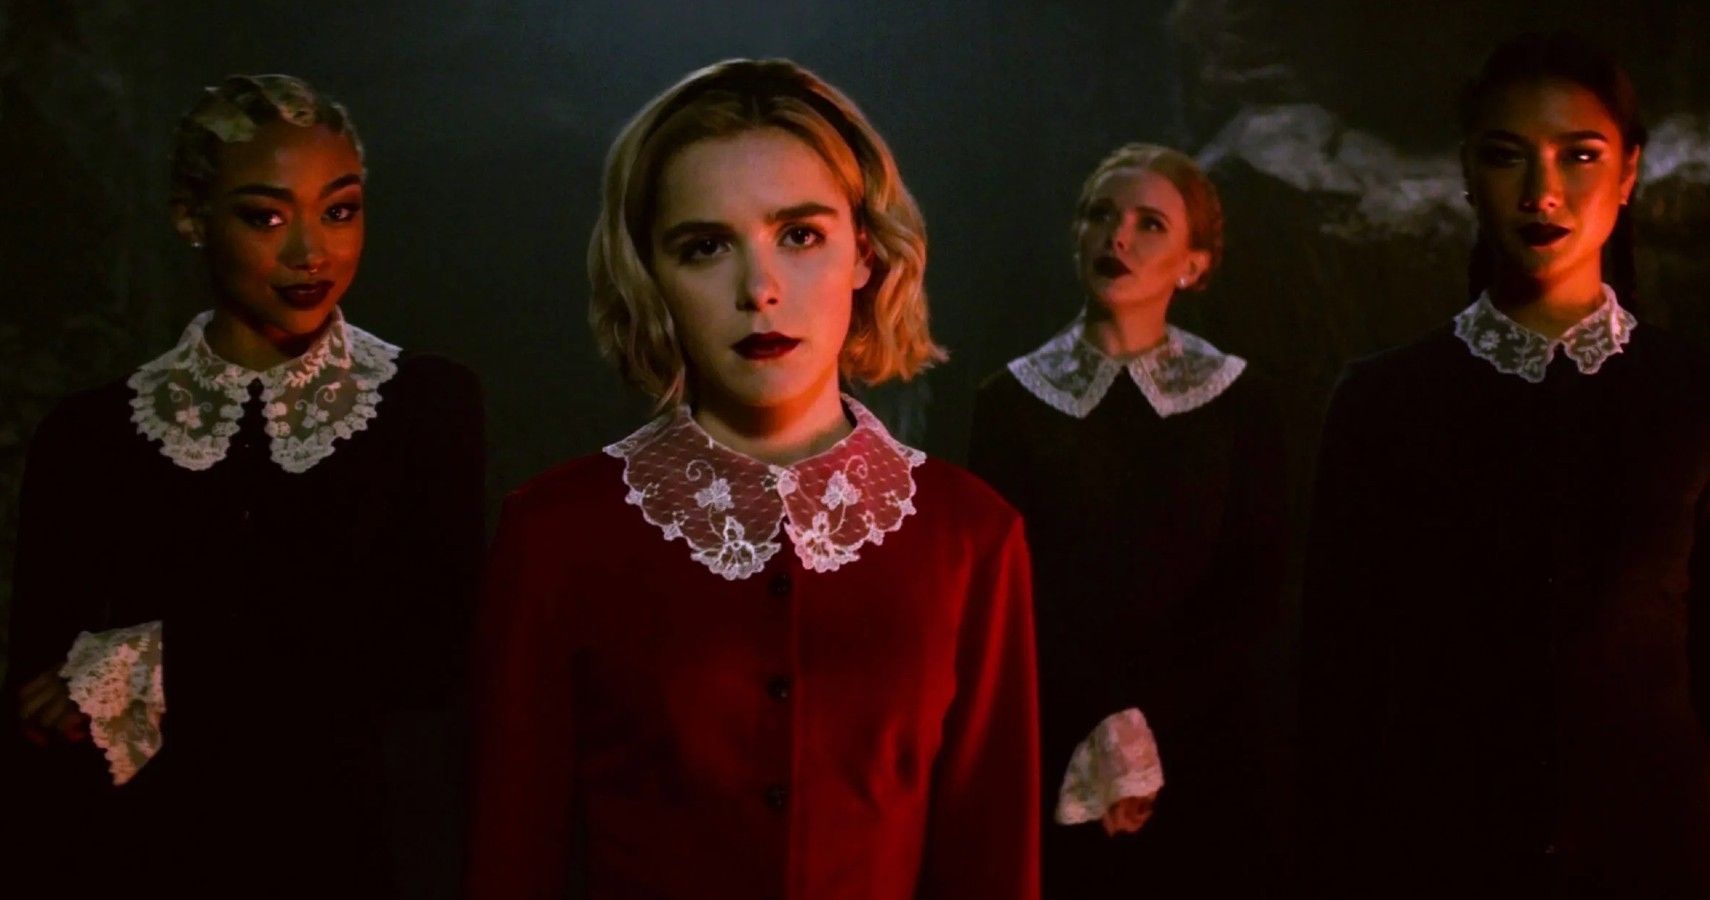 Sabrina Spellman and the Weird Sisters from The Chilling Adventures of Sabrina